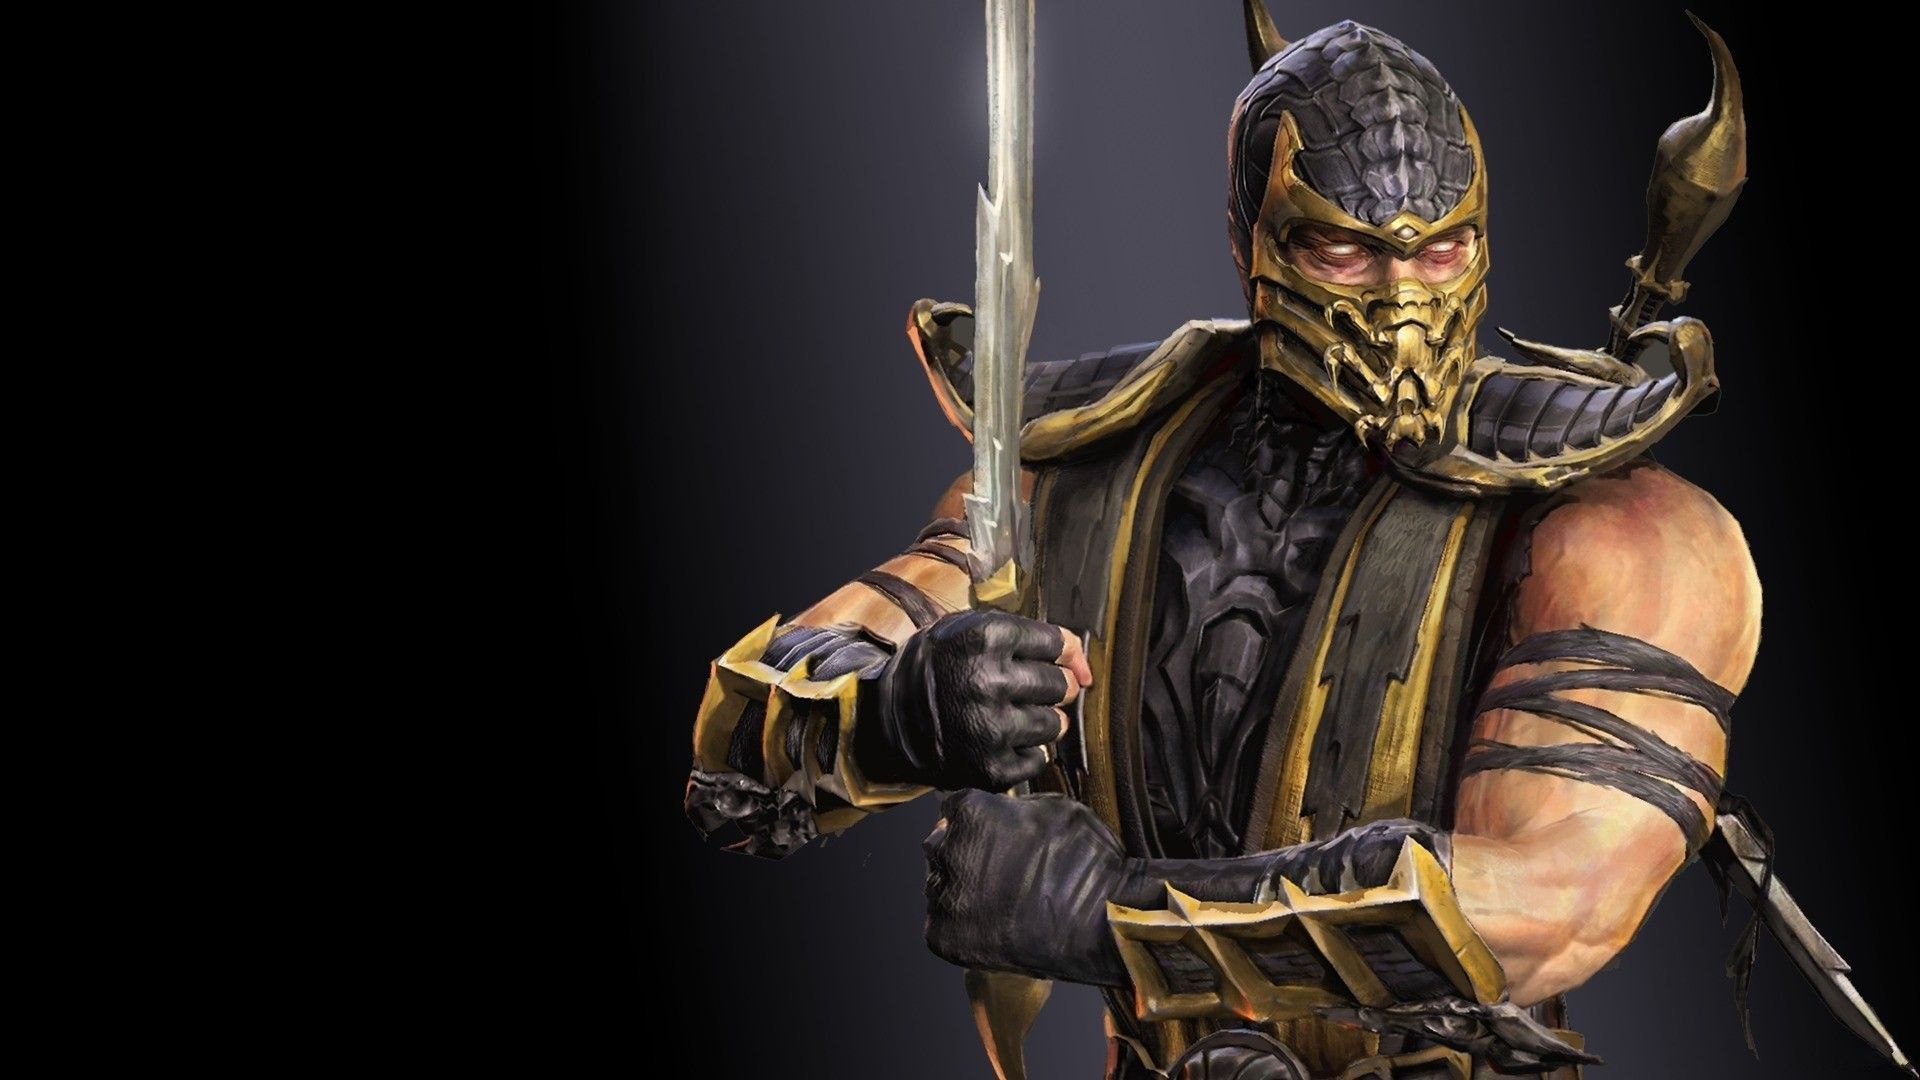 Scorpion Mortal Kombat Wallpaper and Pictures | Cool Wallpapers